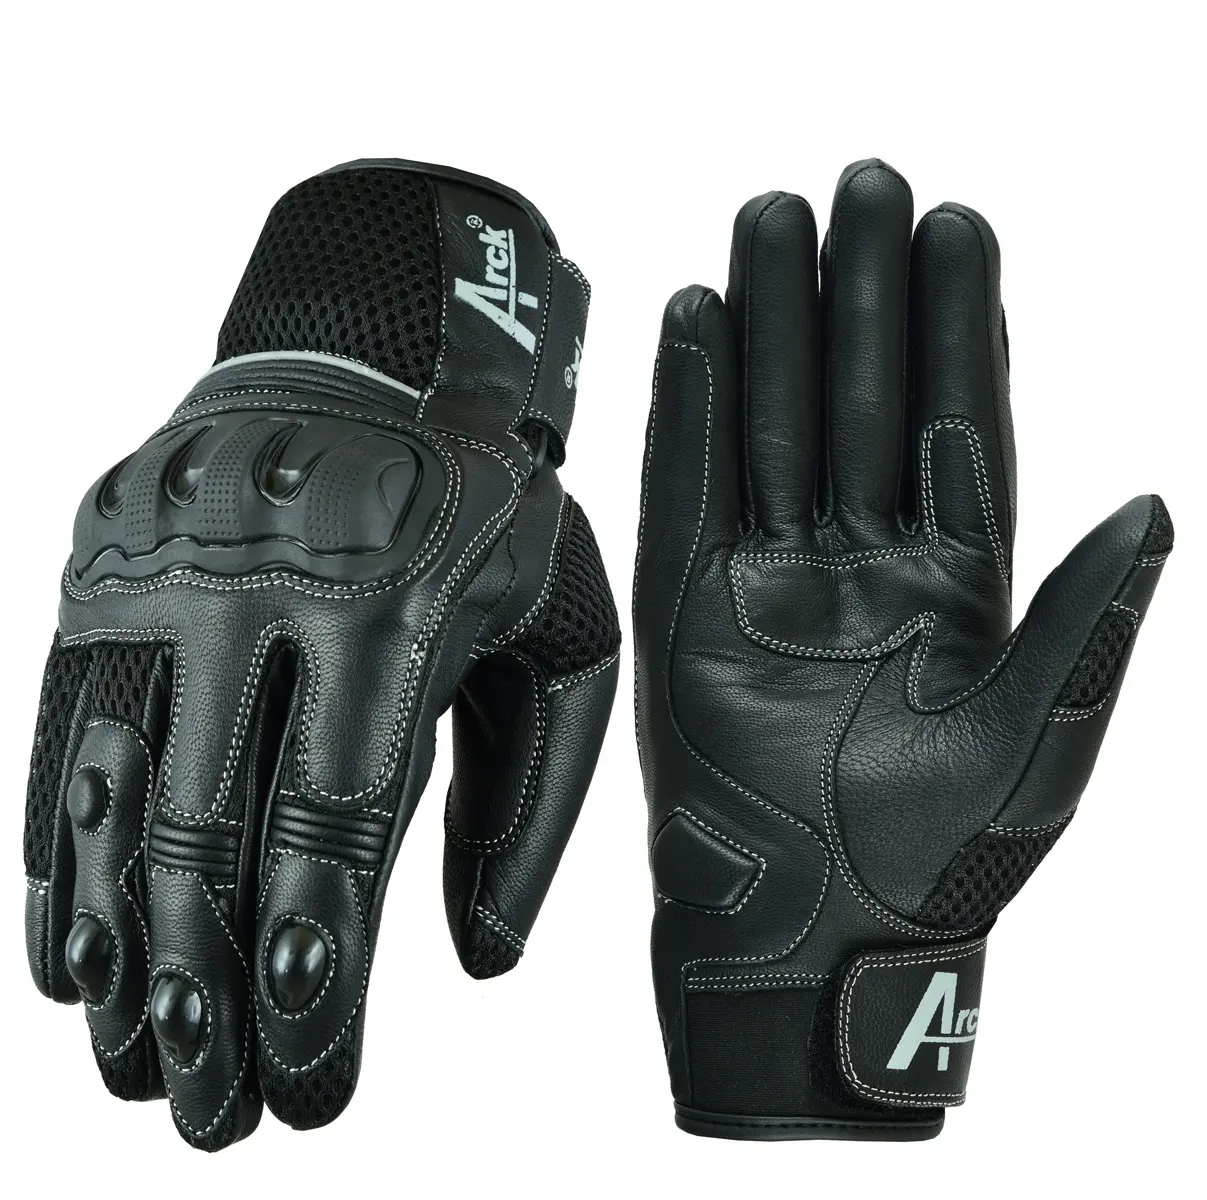 Customized Leather Waterproof Motorcycle Riding Breathable Gloves Touchscreen Free Samples in UK